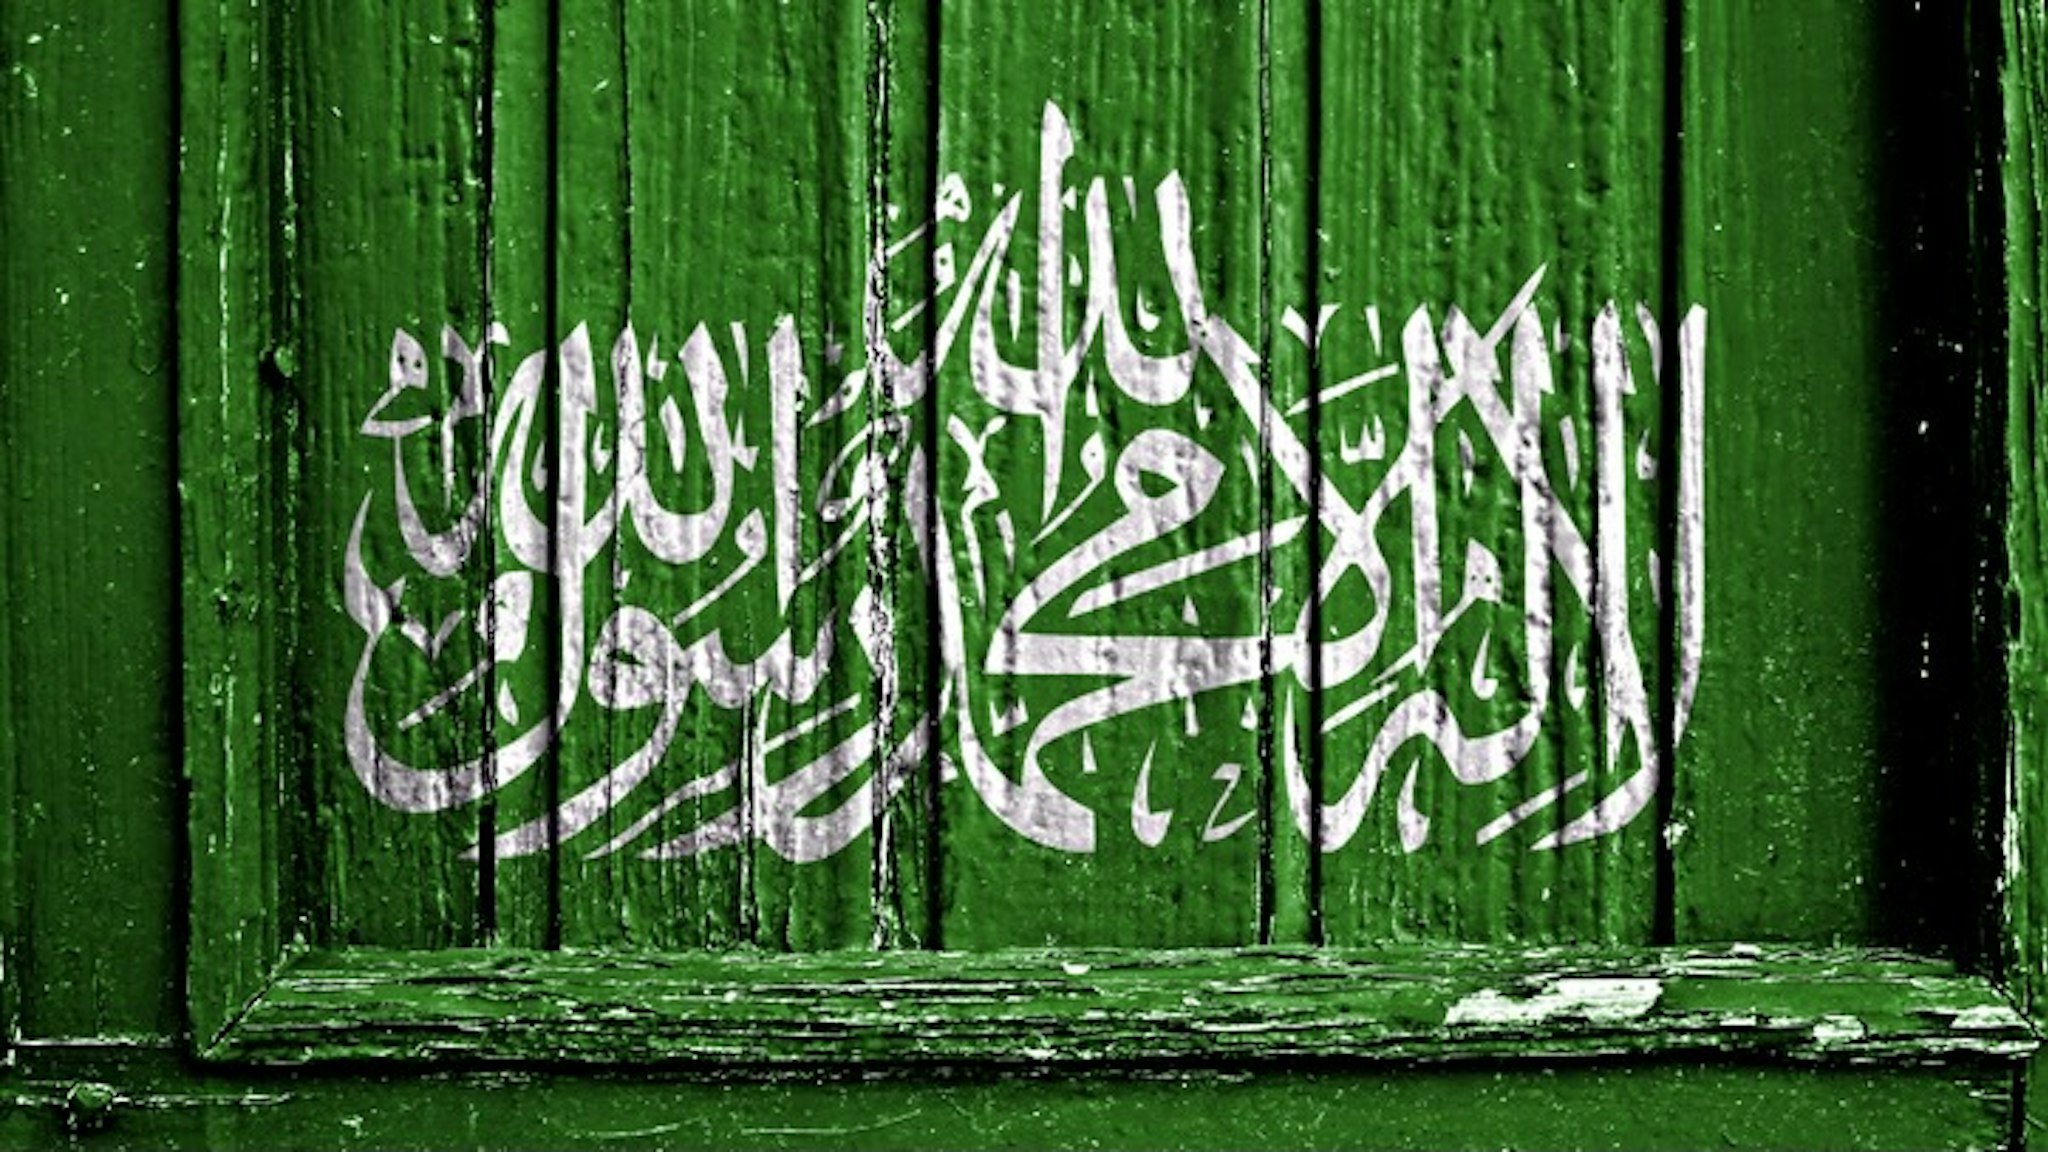 flag of Hamas painted on wooden frame - stock photo flag of Hamas painted on wooden frame Racide via Getty Images